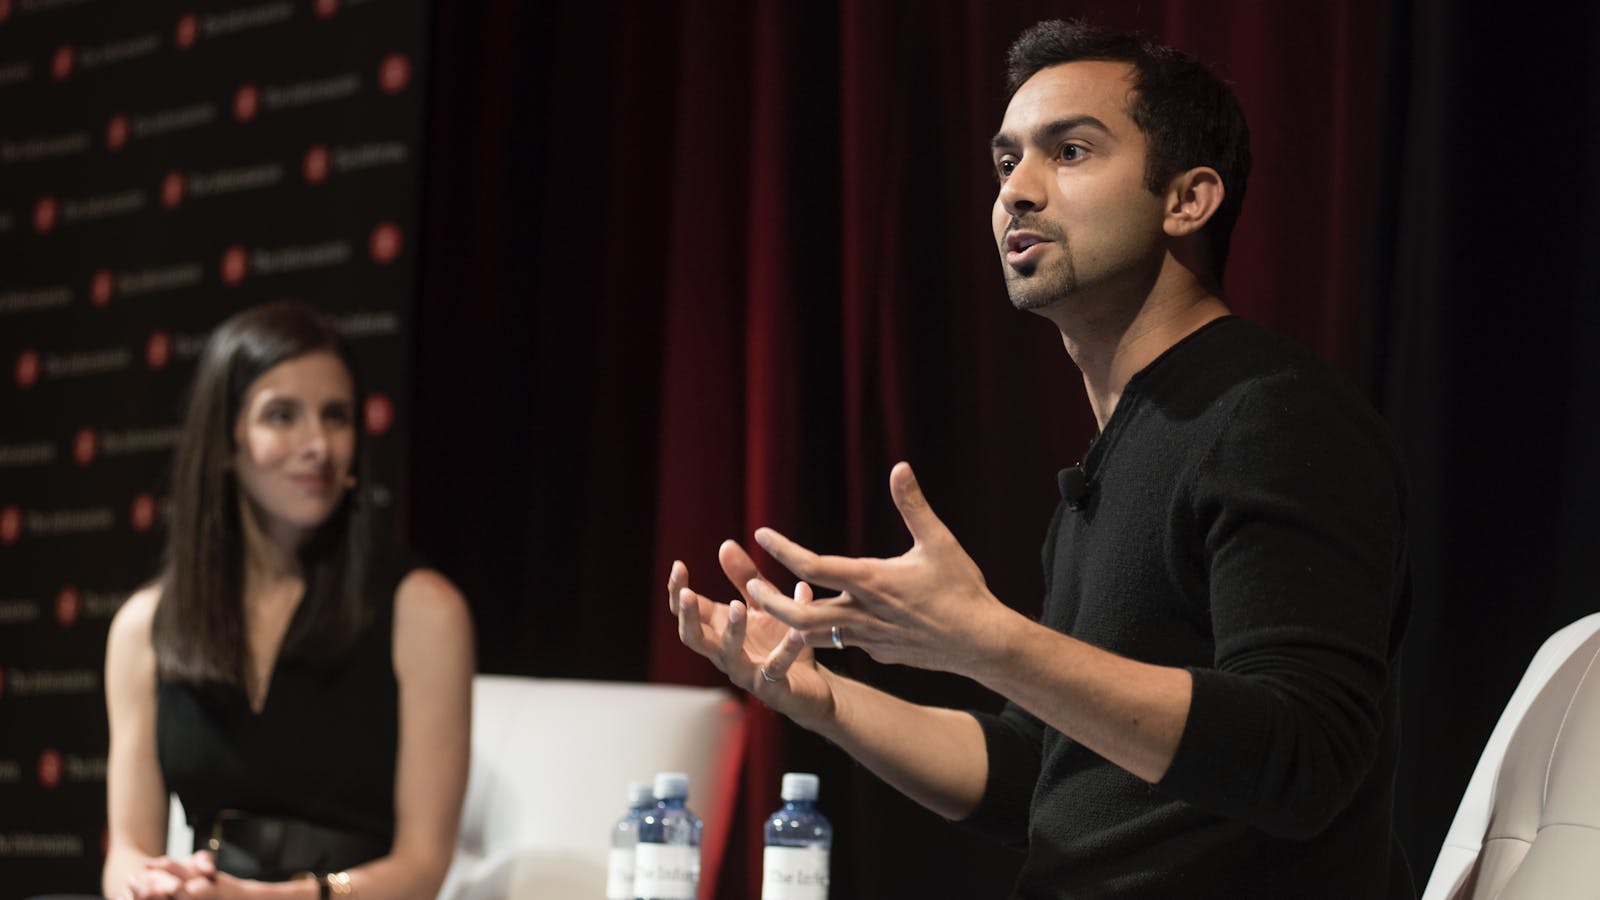 Instacart CEO Apoorva Mehta with The Information's Jessica Lessin last year. Photo by Angie Silvy